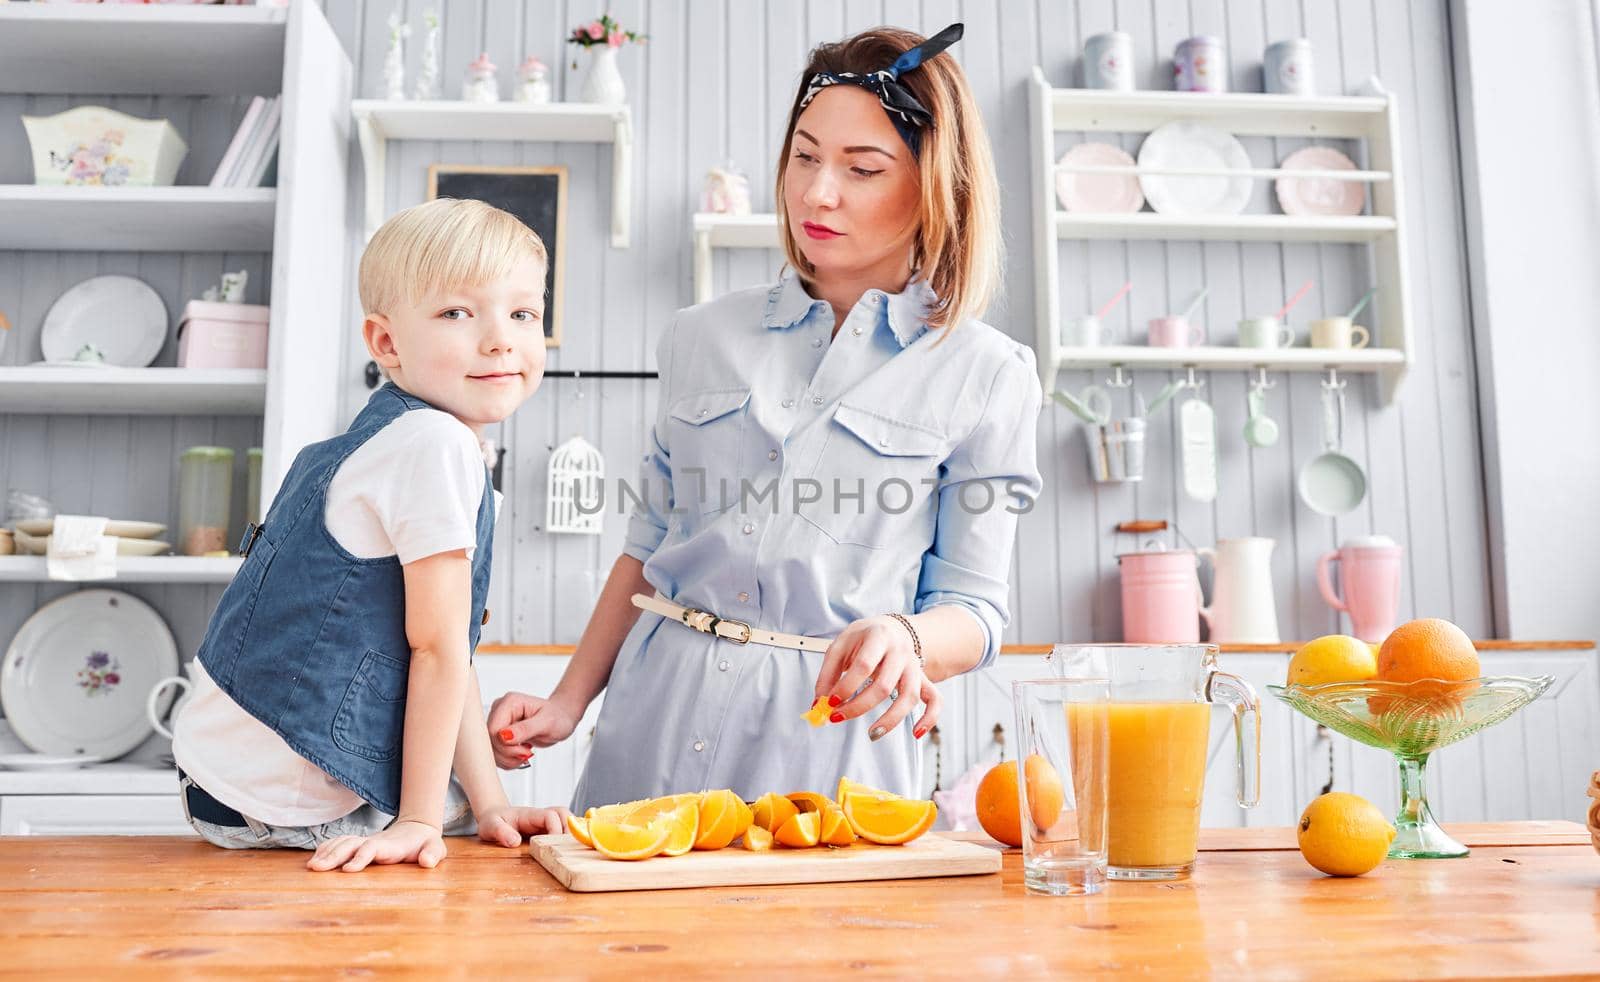 Healthy food, fresh fruit, juicy oranges. Mother and son are smiling while having a breakfast in kitchen. Bright morning in the kitchen. by Malkovkosta